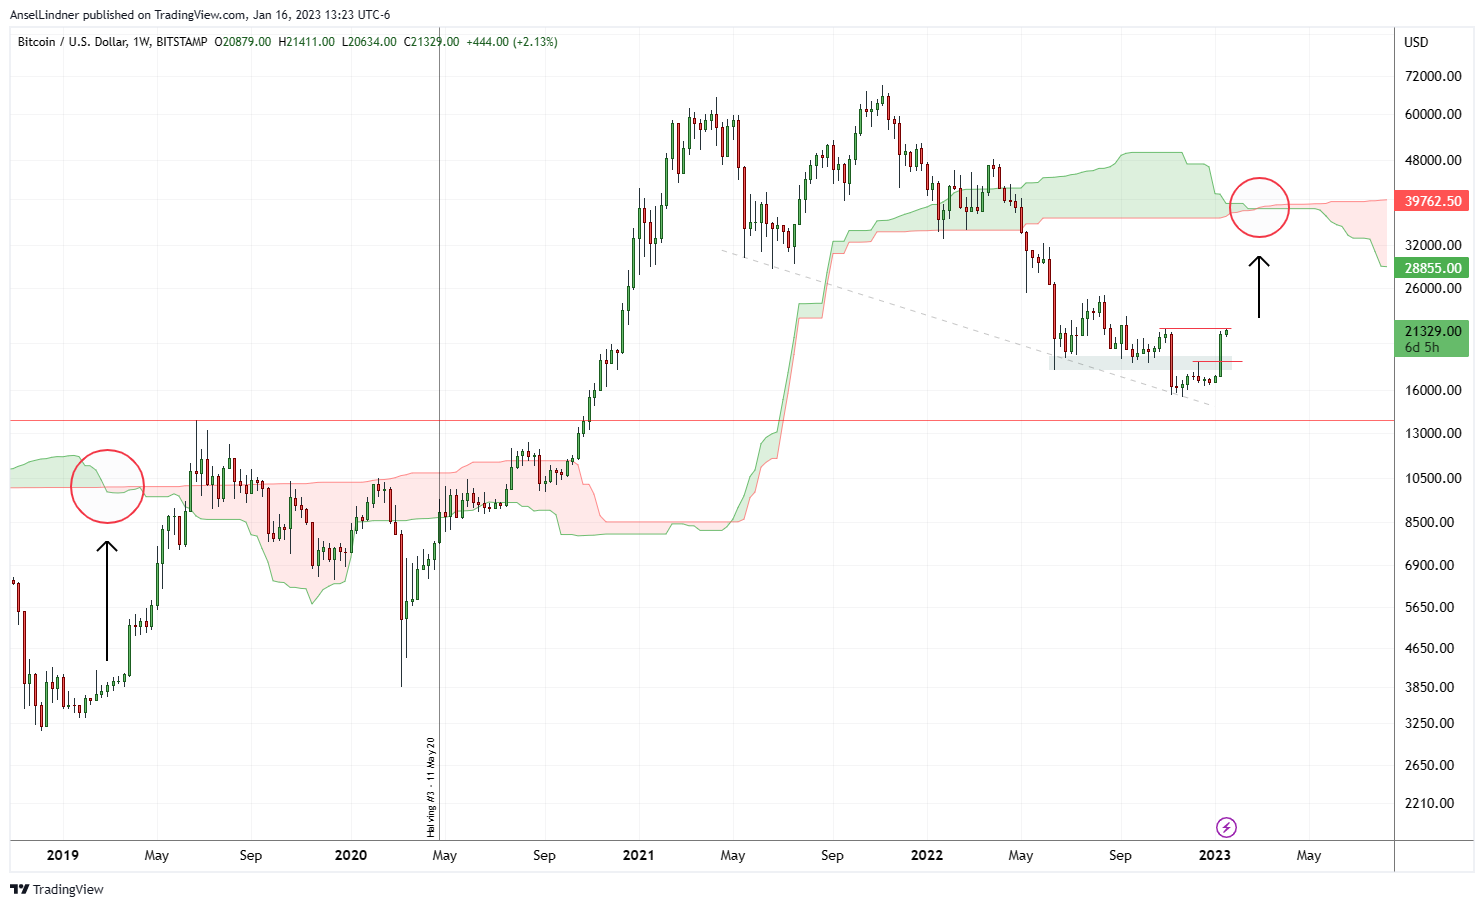 Bitcoin weekly chart with Ichimoku cloud with extended settings